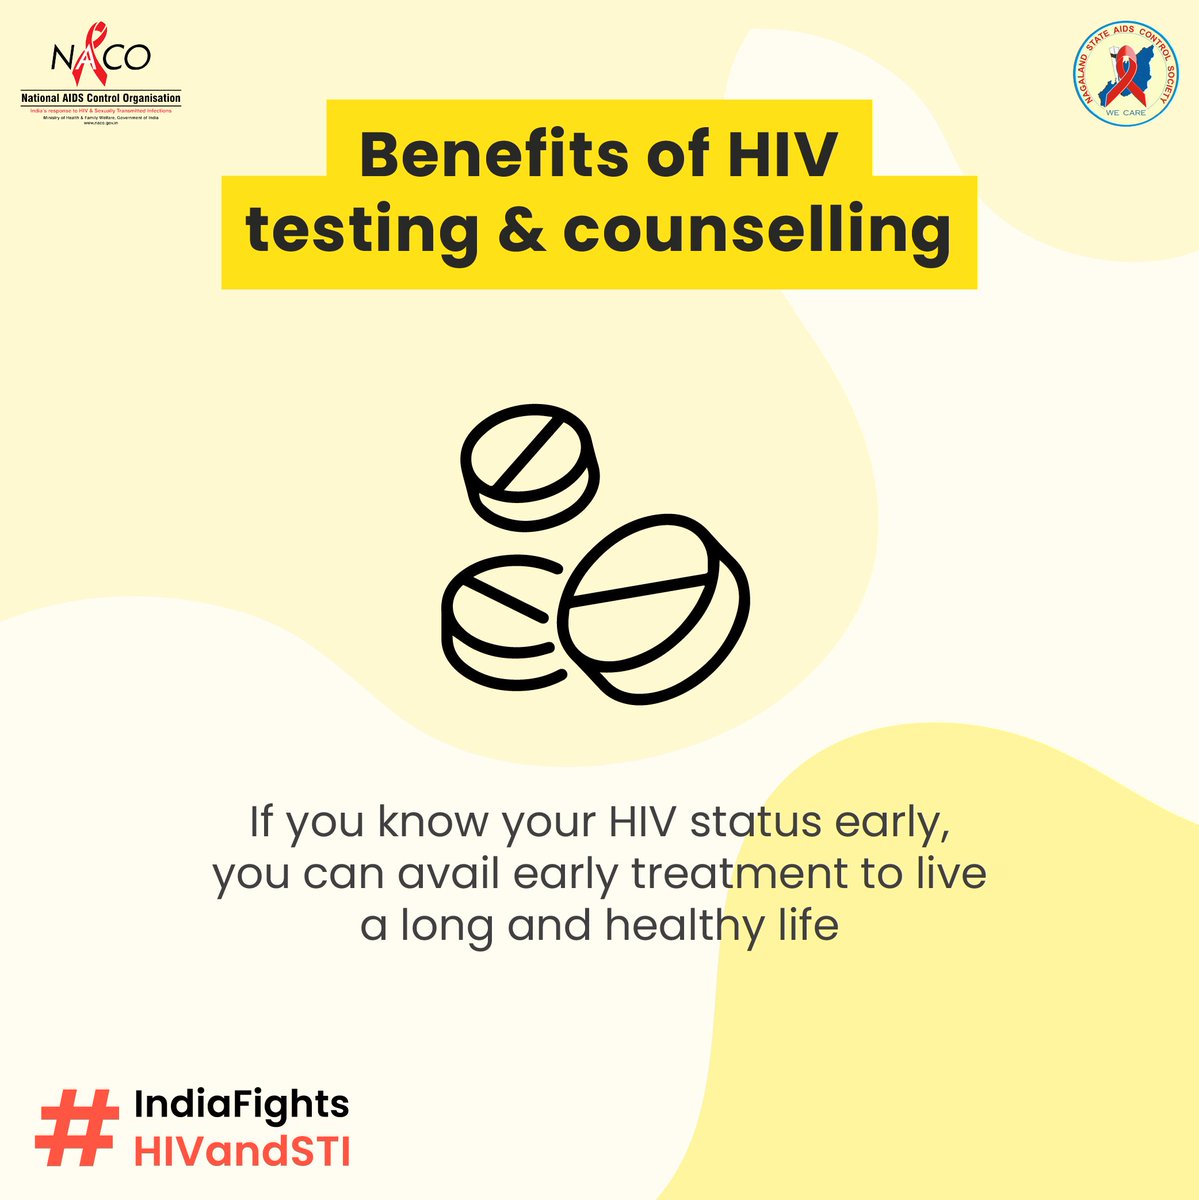 Get tested for HIV at the ICTC centre in the Govt. Hospitals. HIV counseling and testing services are completely free and confidential. #IndiaFightsHIVandSTI. For more info, dial 1097.
@NACOINDIA @MyGovNagaland @HealthNagaland @NagalandNhm @dipr_nagaland @PIBKohima